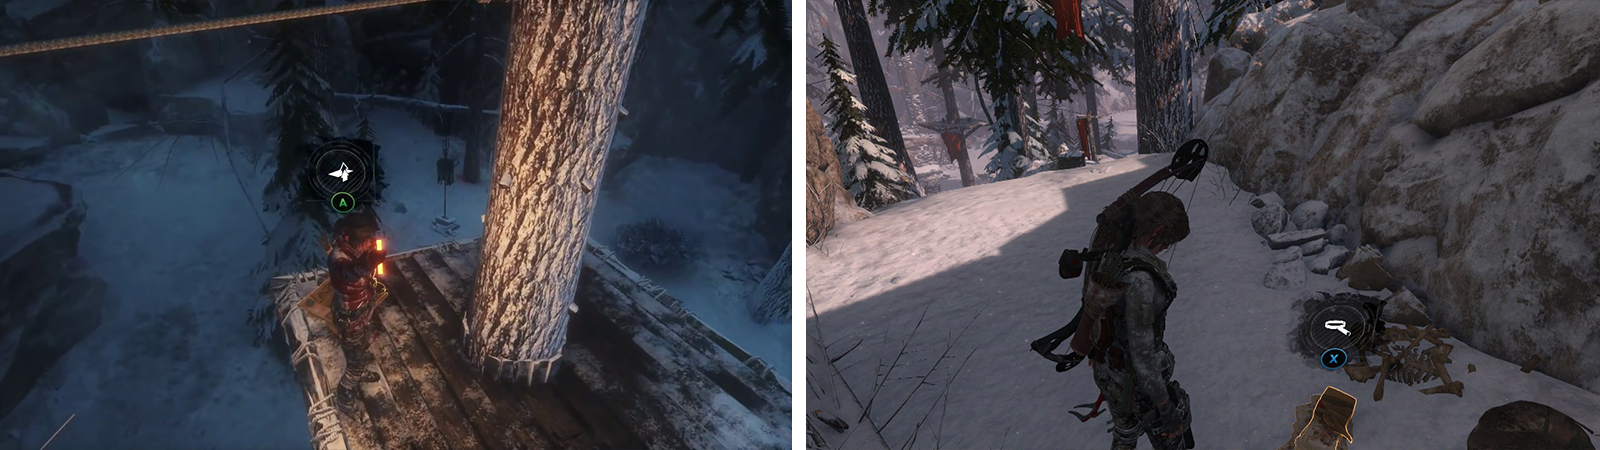 There is an Archivist Map on one of the hunting platforms (left). Document 03 can be found atop a ledge near the rope leading to the Archivist Map (right).